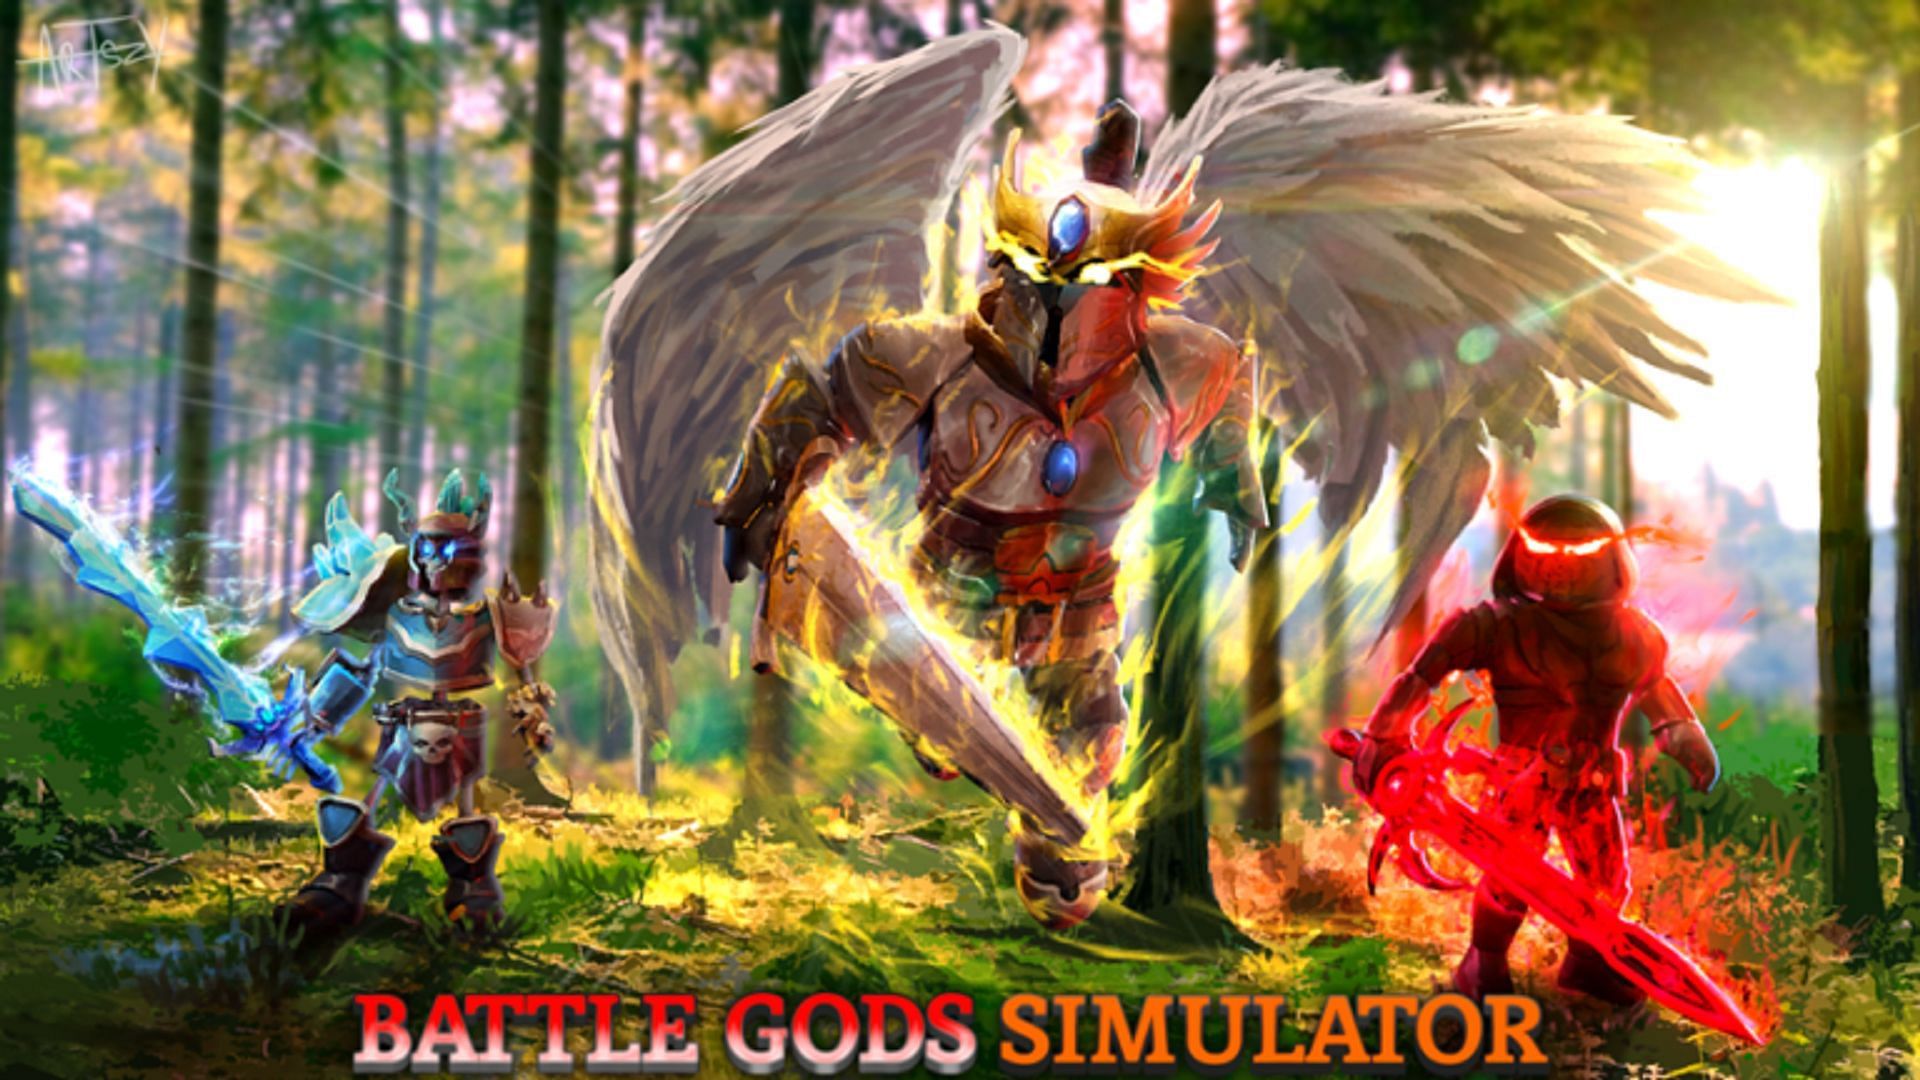 Brand new codes just came in for Battle Gods Simulator (Image via Roblox)